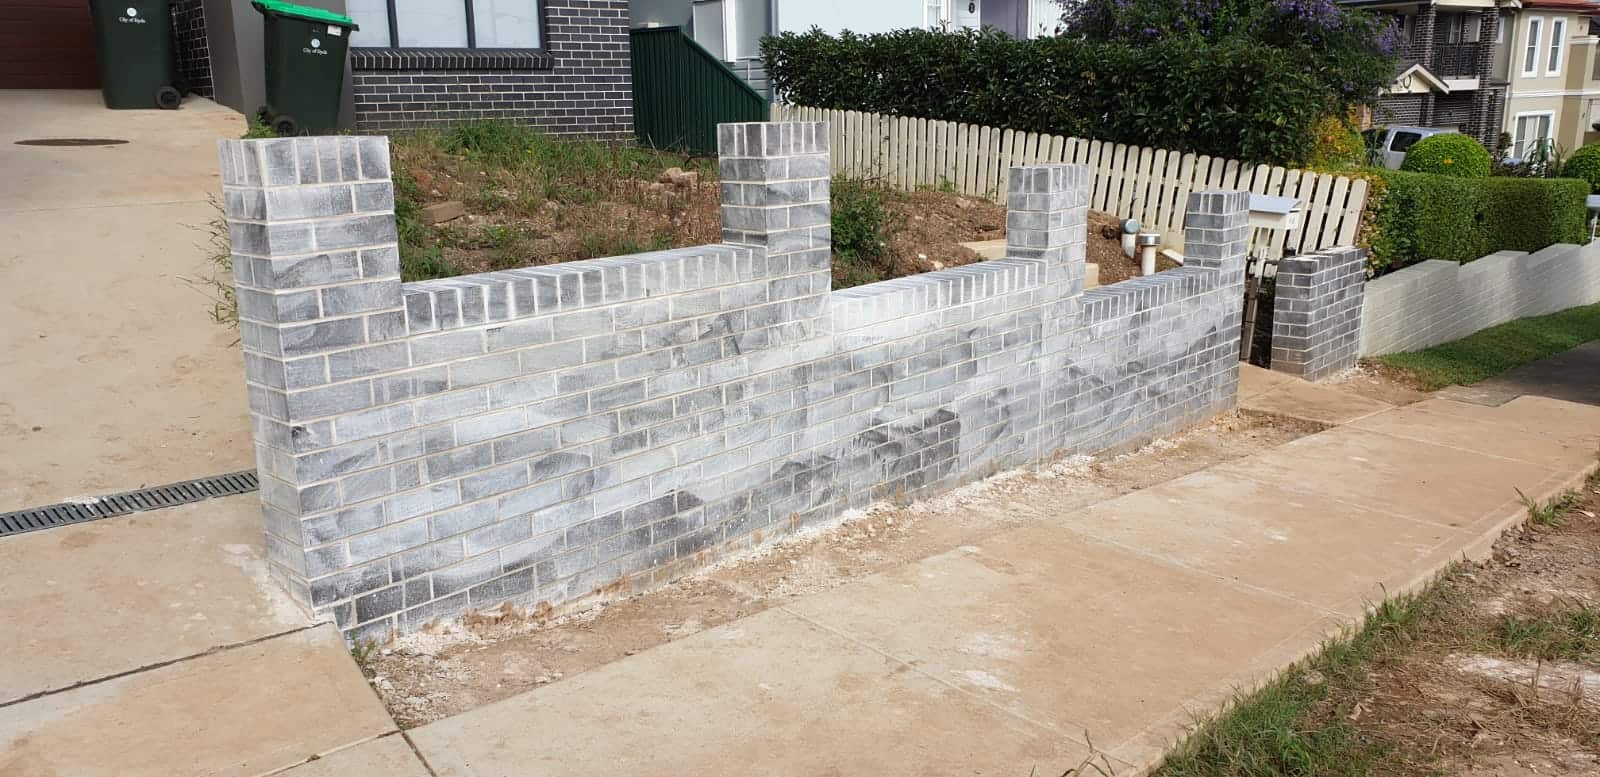 Brickwork Sealing and Cleaning Sydney